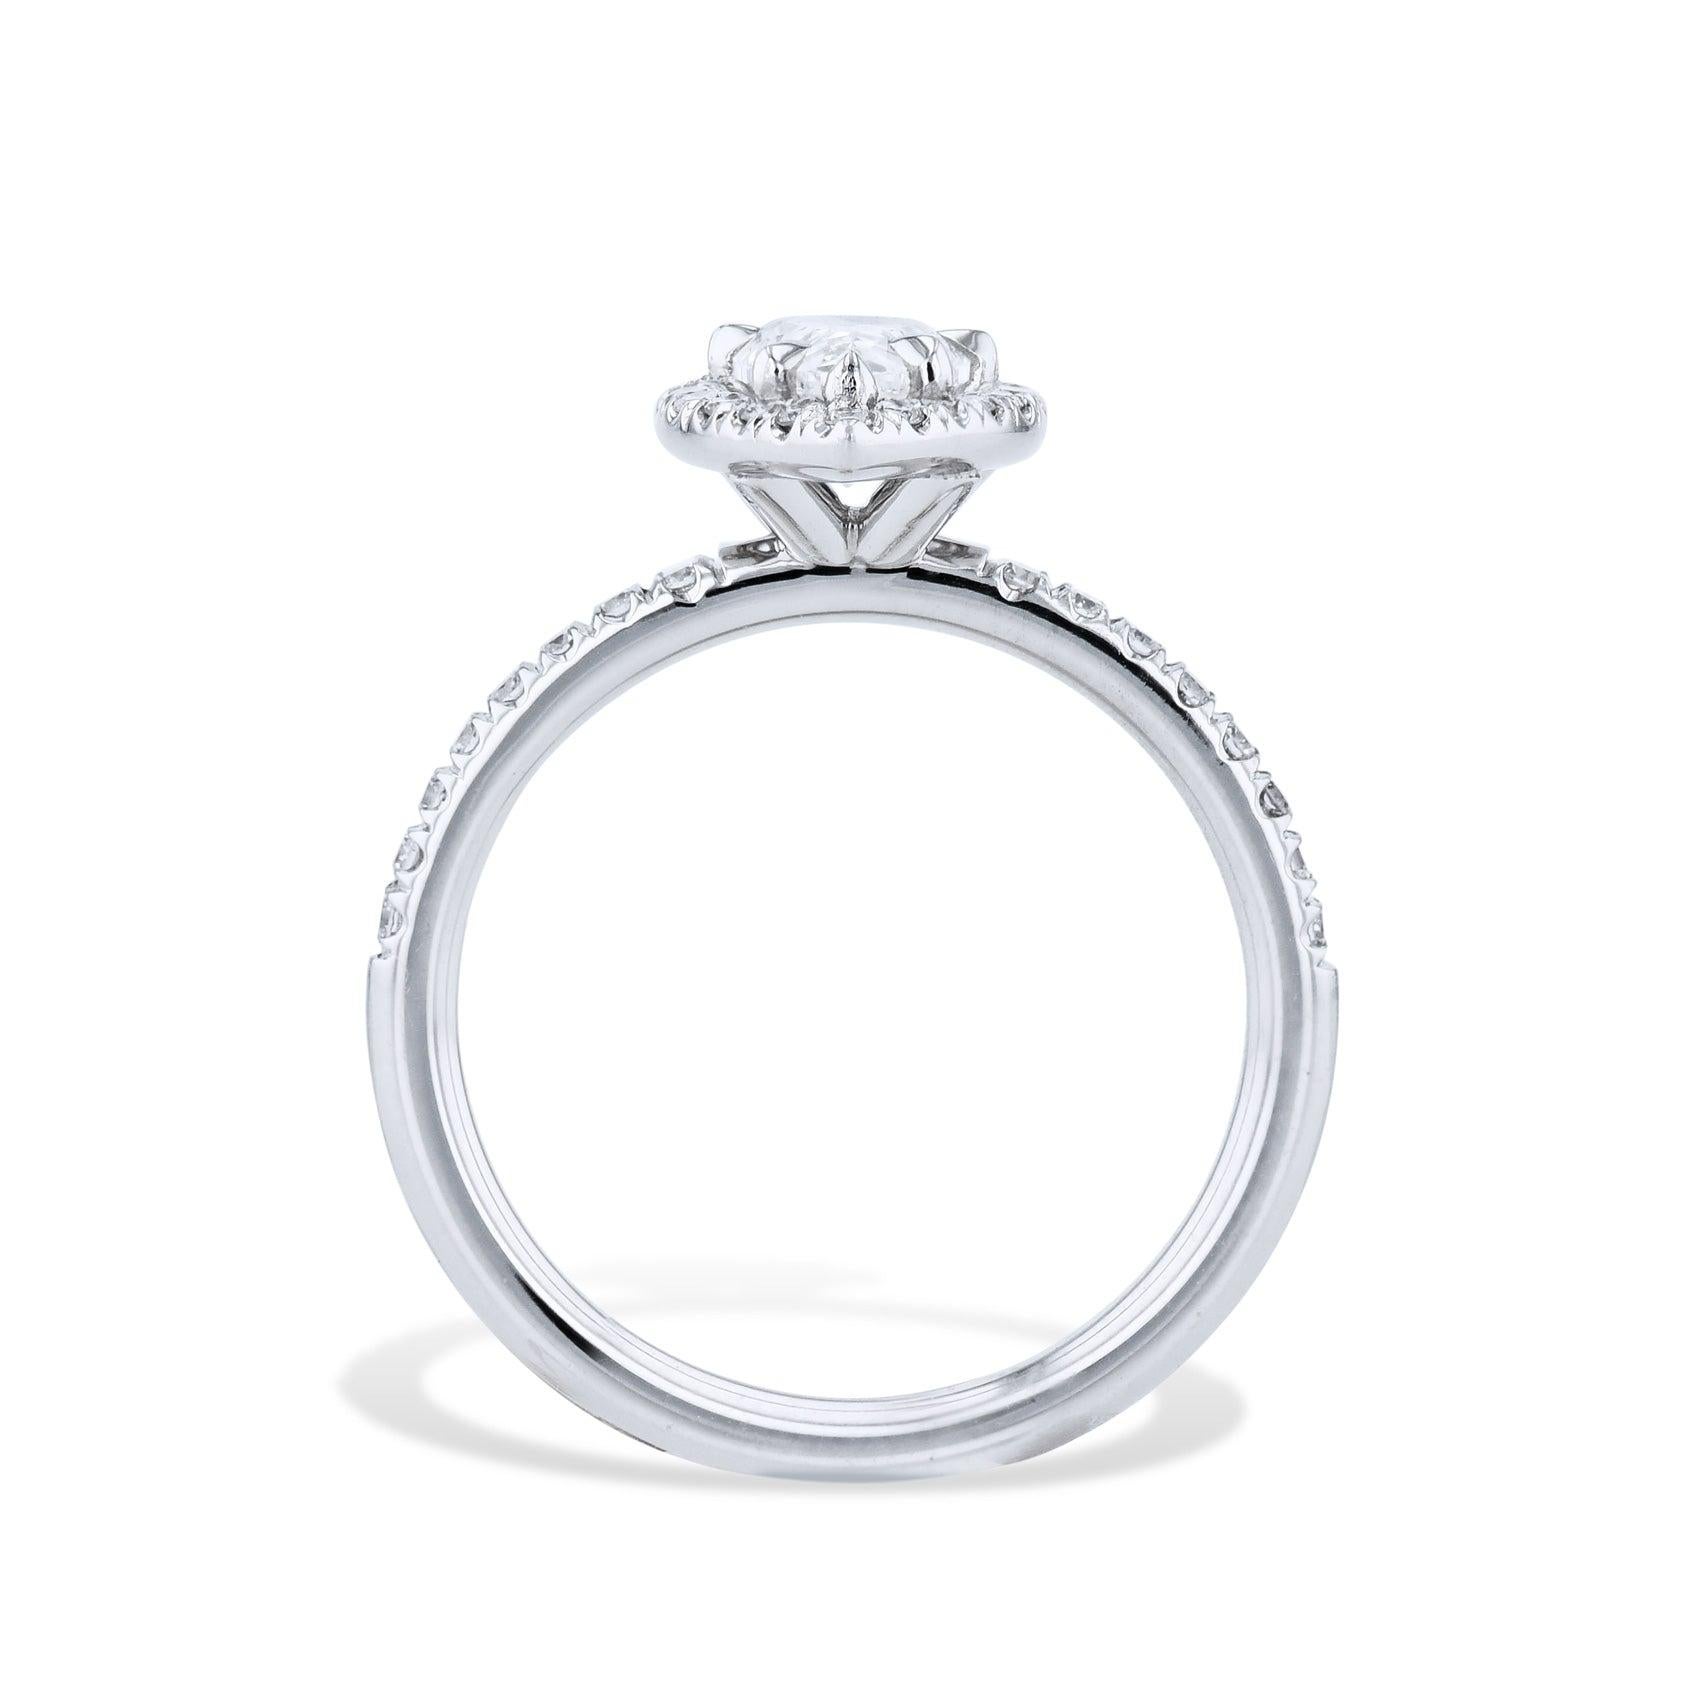 Experience sheer luxury with this Platinum Pear Shaped Diamond Engagement Ring!  Center stone is surrounded by a shimmering pave diamond halo and pave down shank. Handcrafted to perfection by H&H Jewels. Treat yourself to an unforgettable symbol of